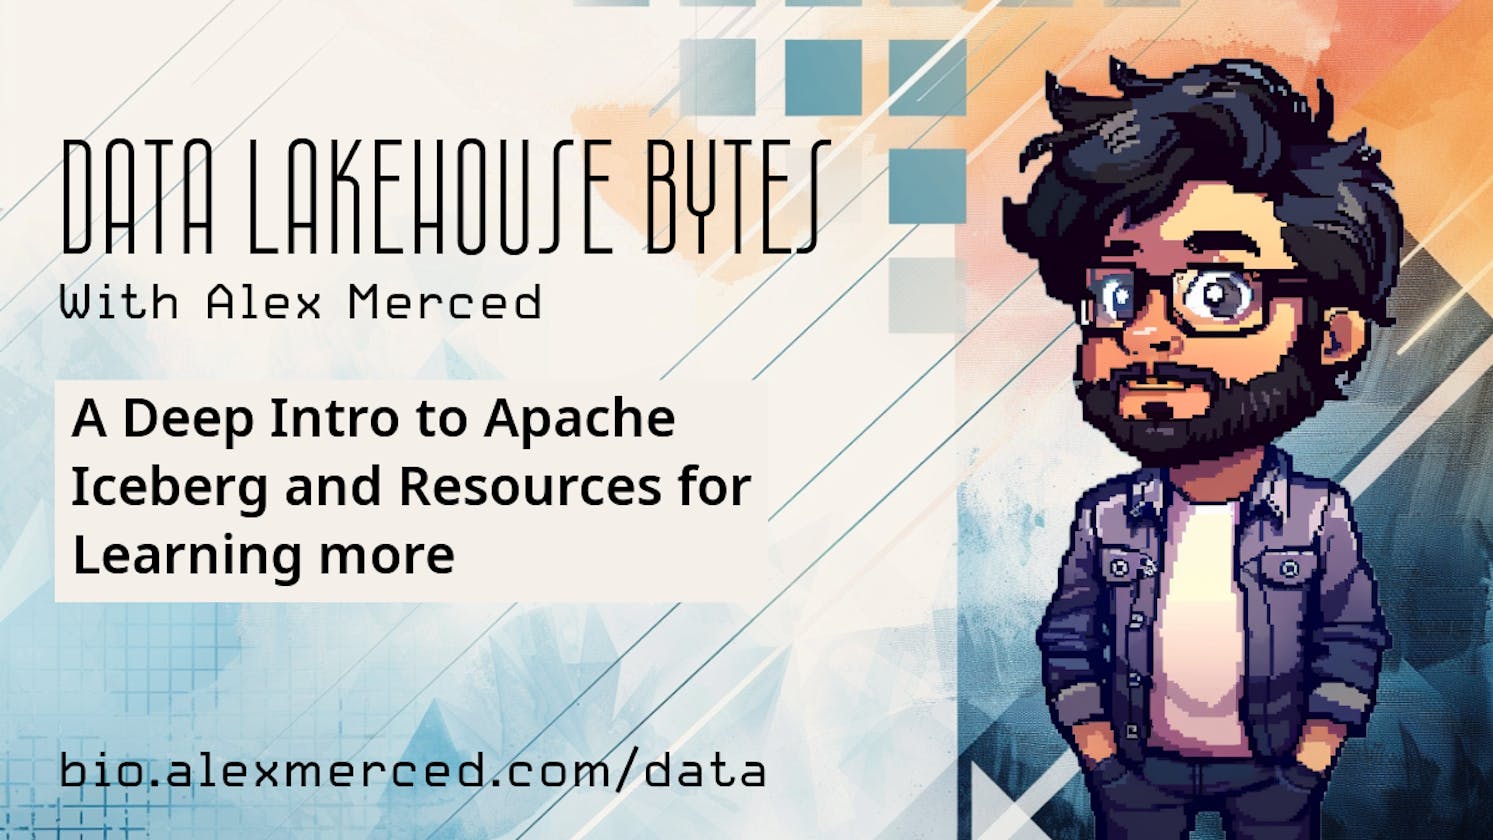 A Deep Intro to Apache Iceberg and Resources for Learning More